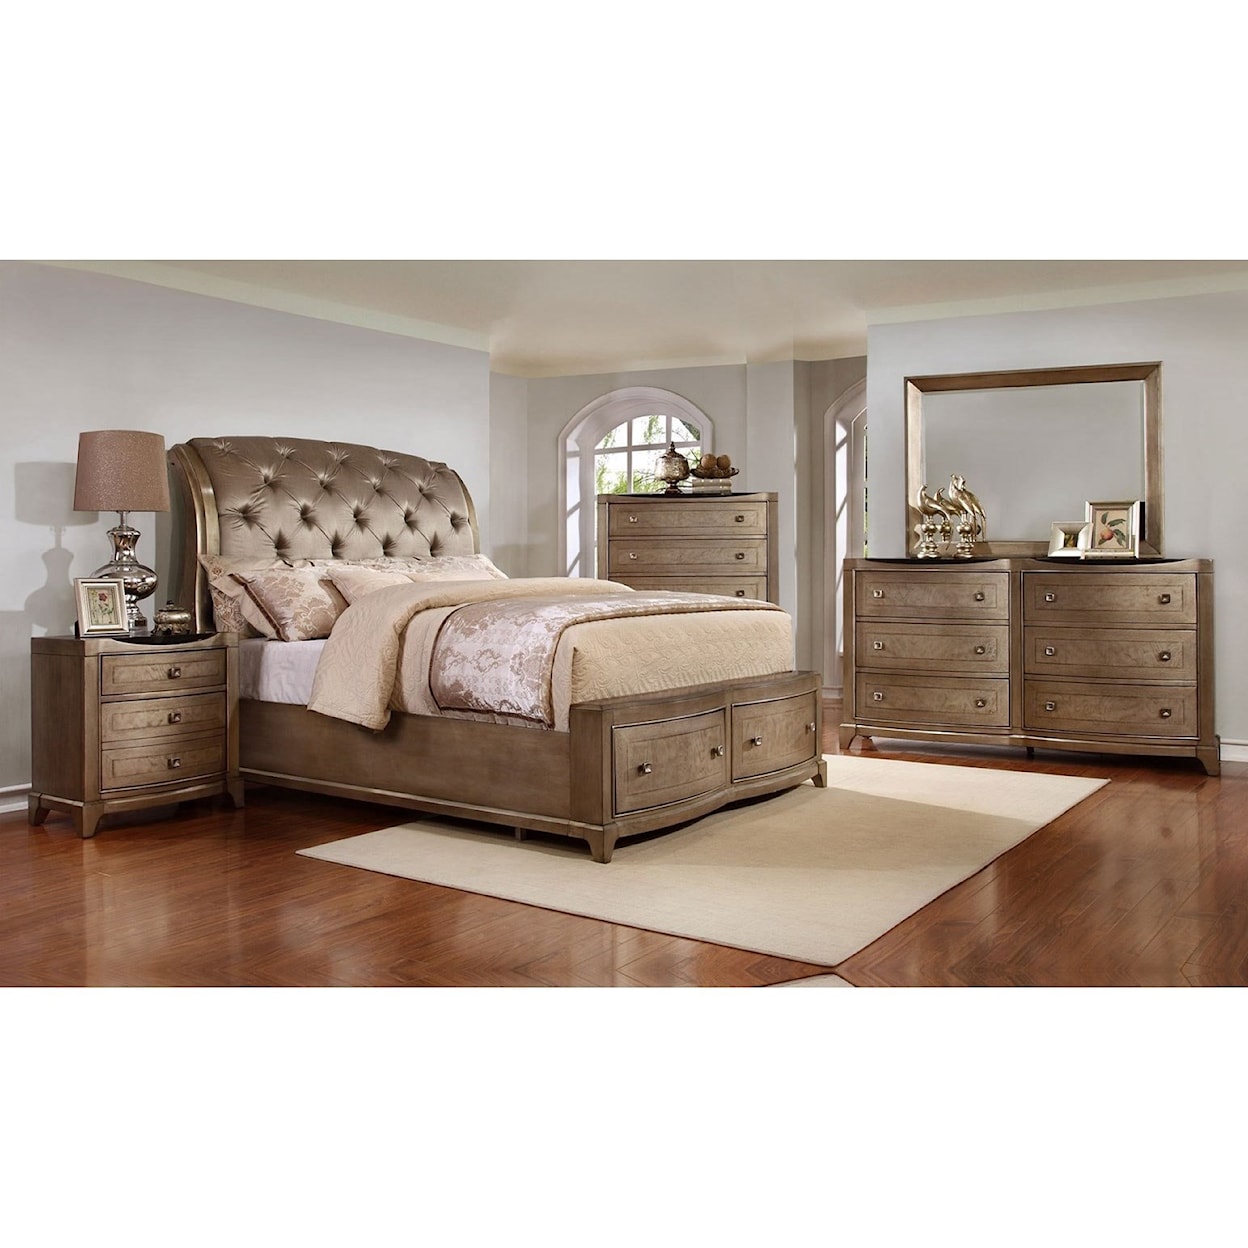 Avalon Furniture Uptown Queen Bedroom Group